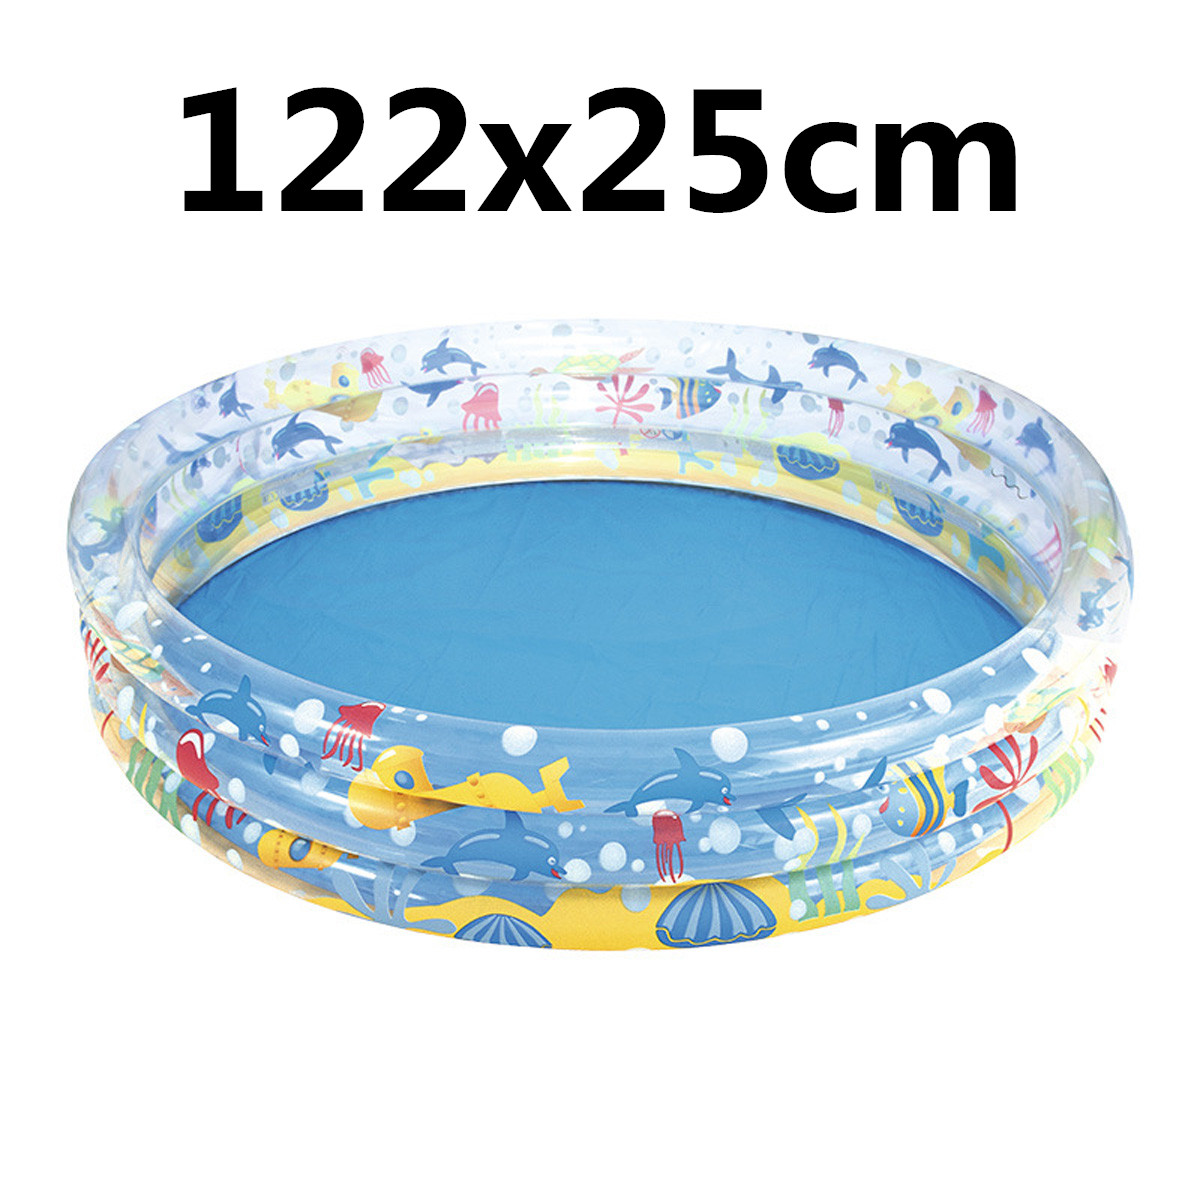 PVC-Round-Inflatable-Swimming-Pool-High-Quality-Childrens-Paddling-Pool-Outdoor-Camping-Travel-1780881-3